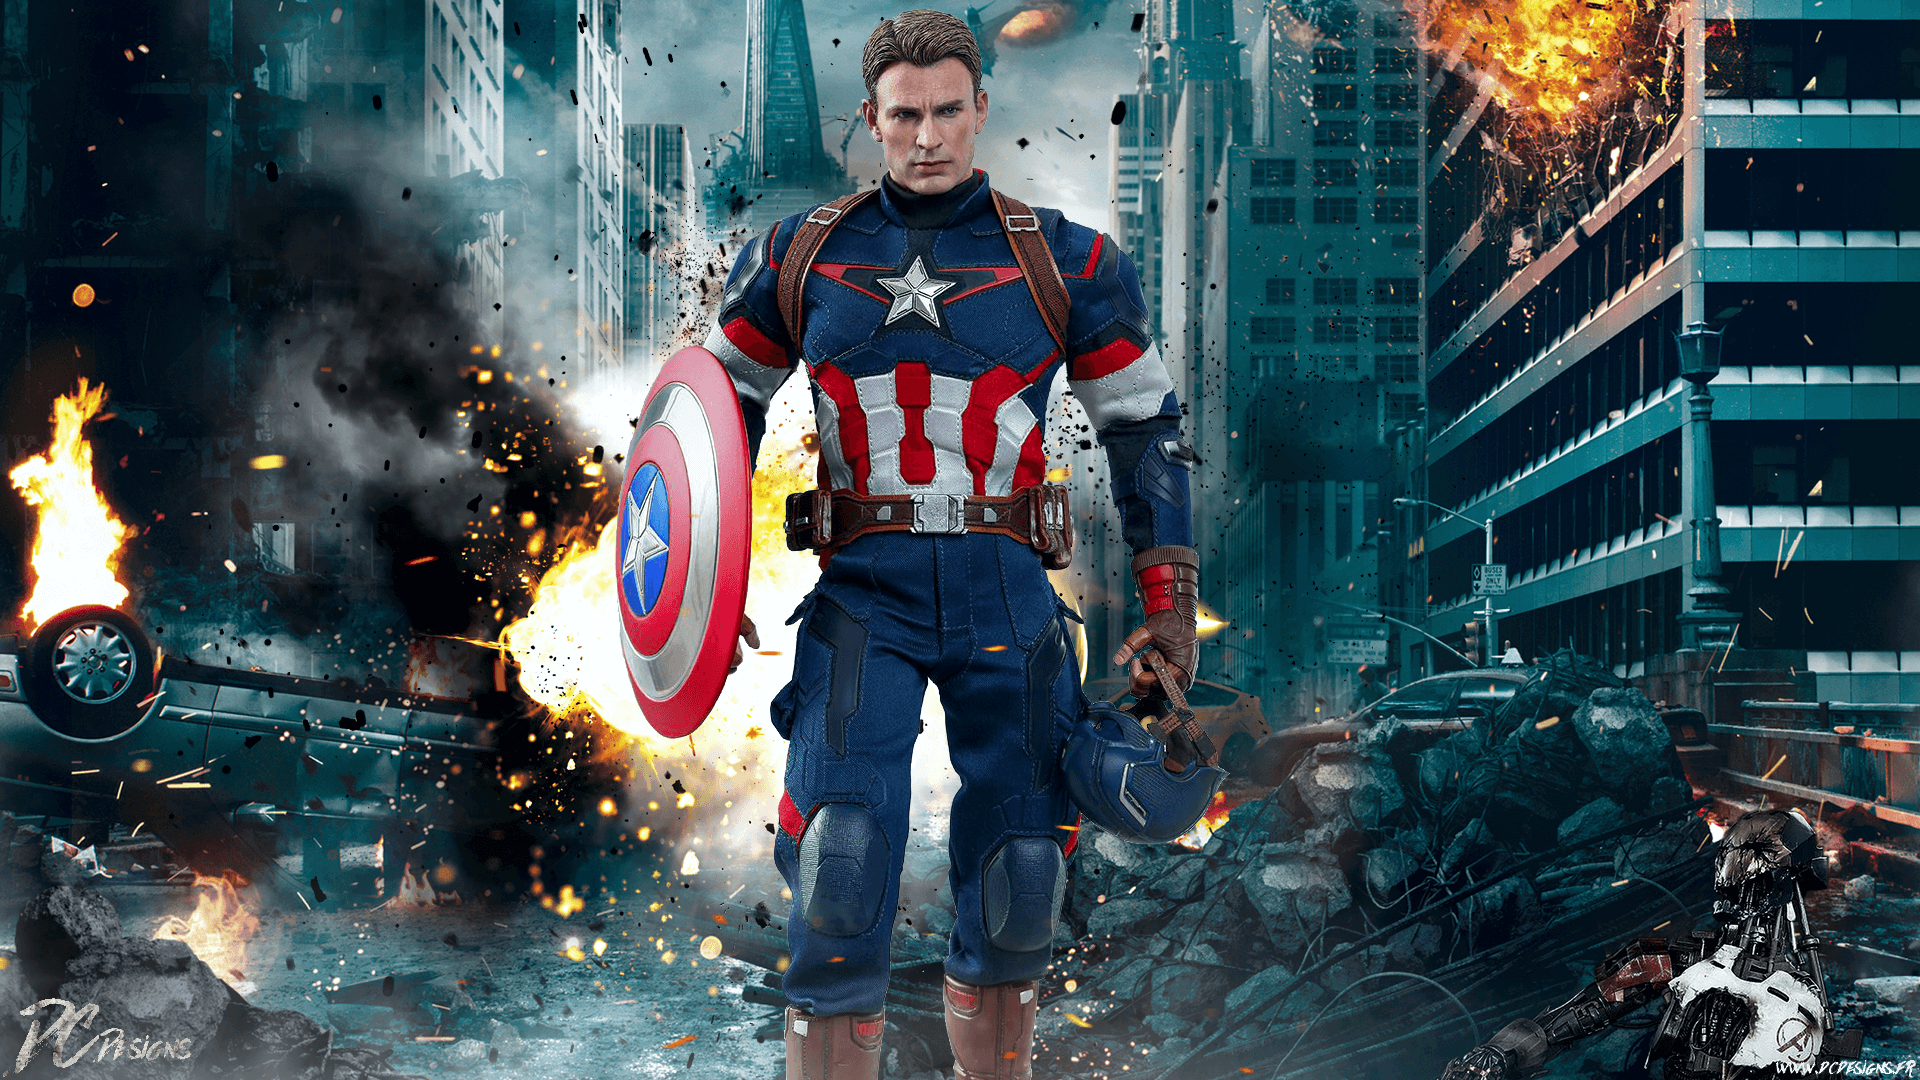 41+ Chris Evans Captain America Wallpapers: HD, 4K, 5K for PC and Mobile |  Download free images for iPhone, Android